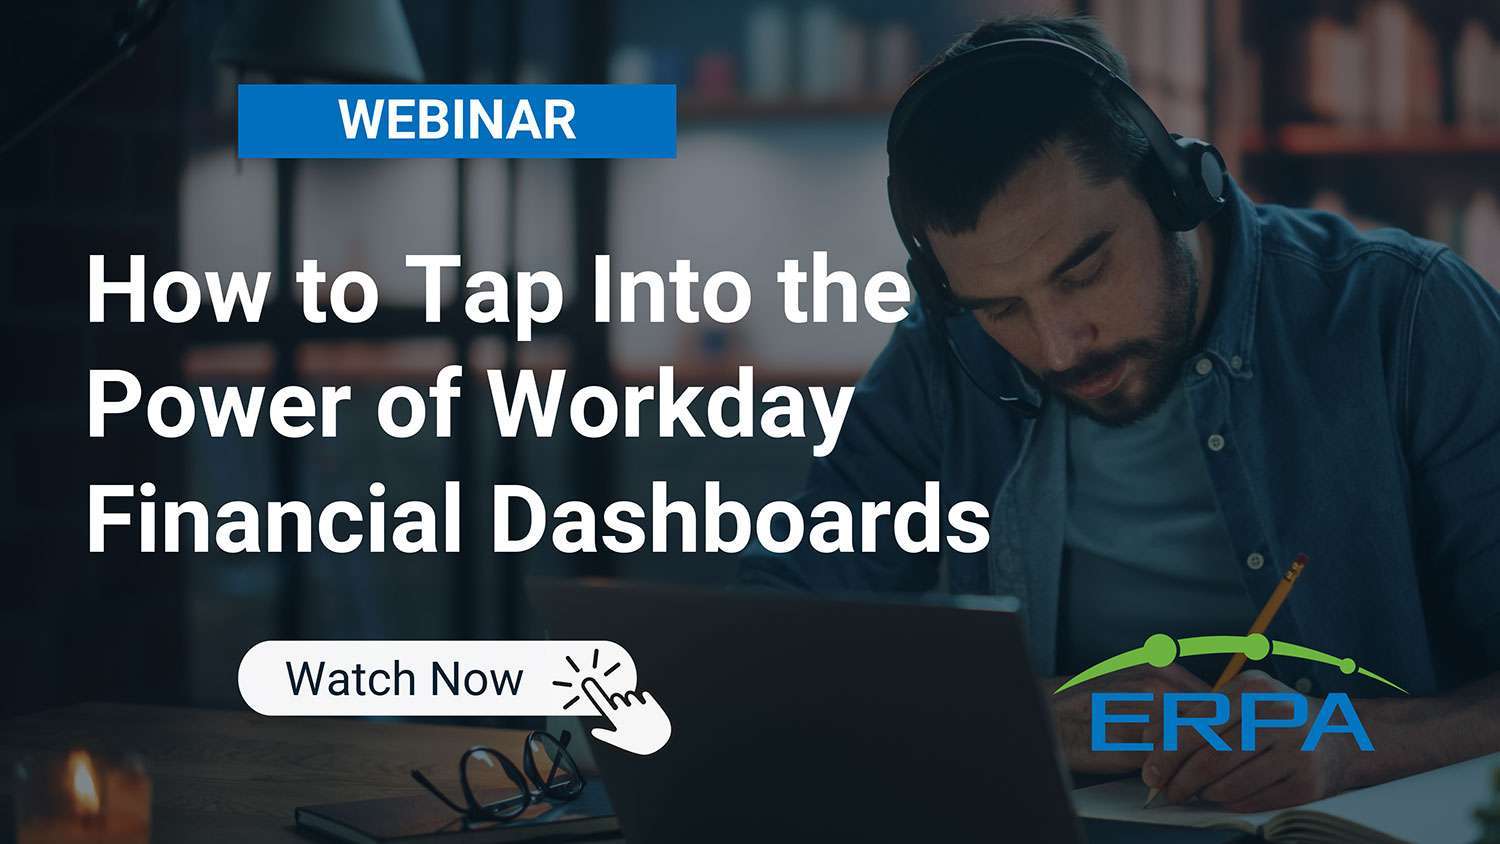 ERPA Webinar: How to Tap Into the Power of Workday Financial Dashboards